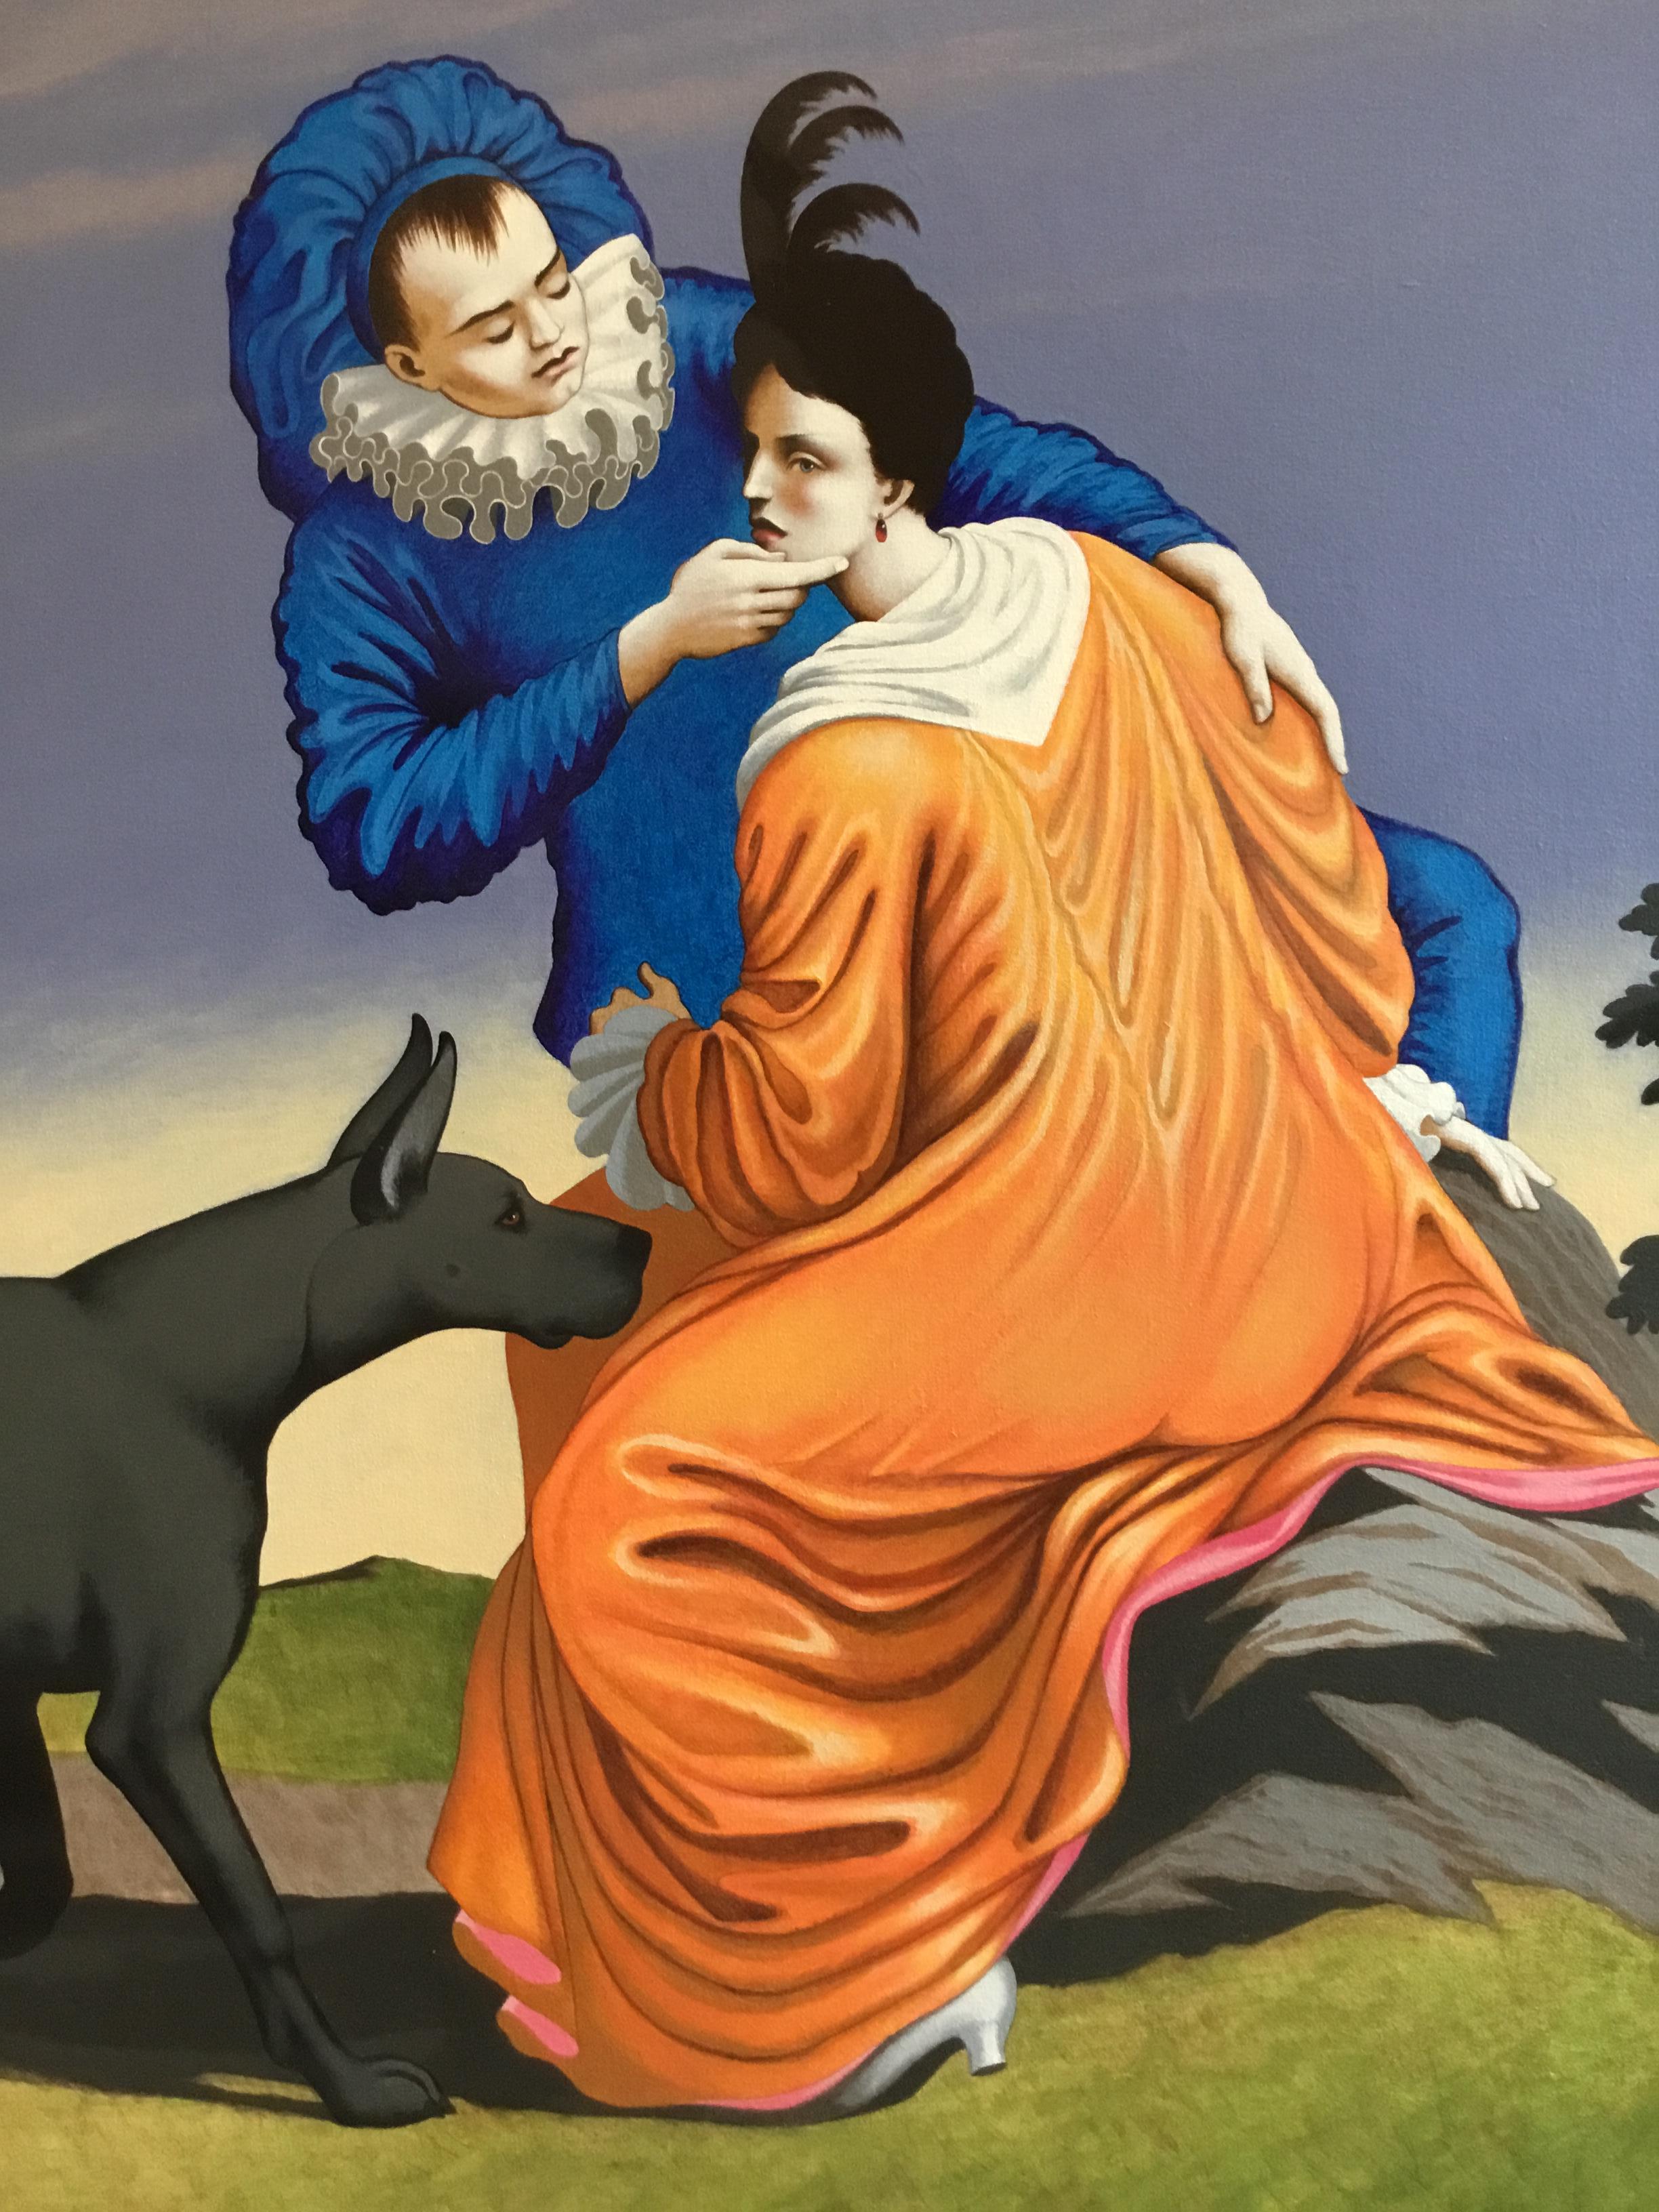 LIAISONS I
Original painting by Lynn Curlee
One of a series of eight paintings based upon 17th century French engravings.
Each painting includes a man, a woman, and a dog.
Mr Curlee is a gallery painter, and author/illustrator of award winning